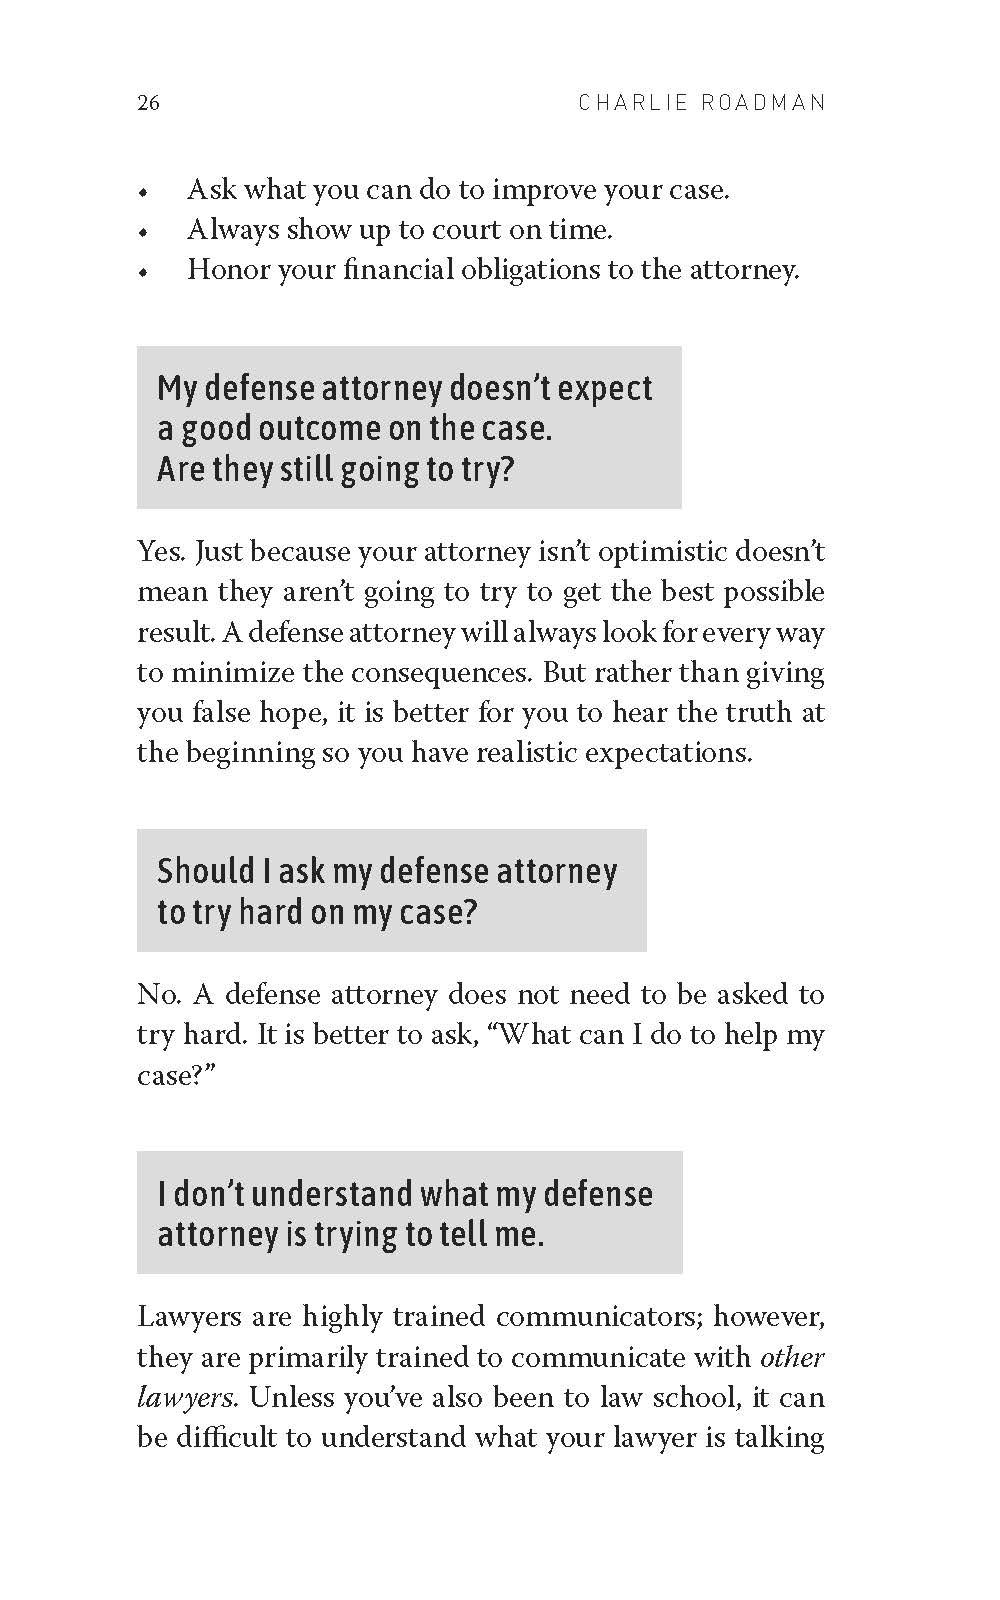 Sample_of_Defendant_s_Guide_to_Defense_Page_28.jpg